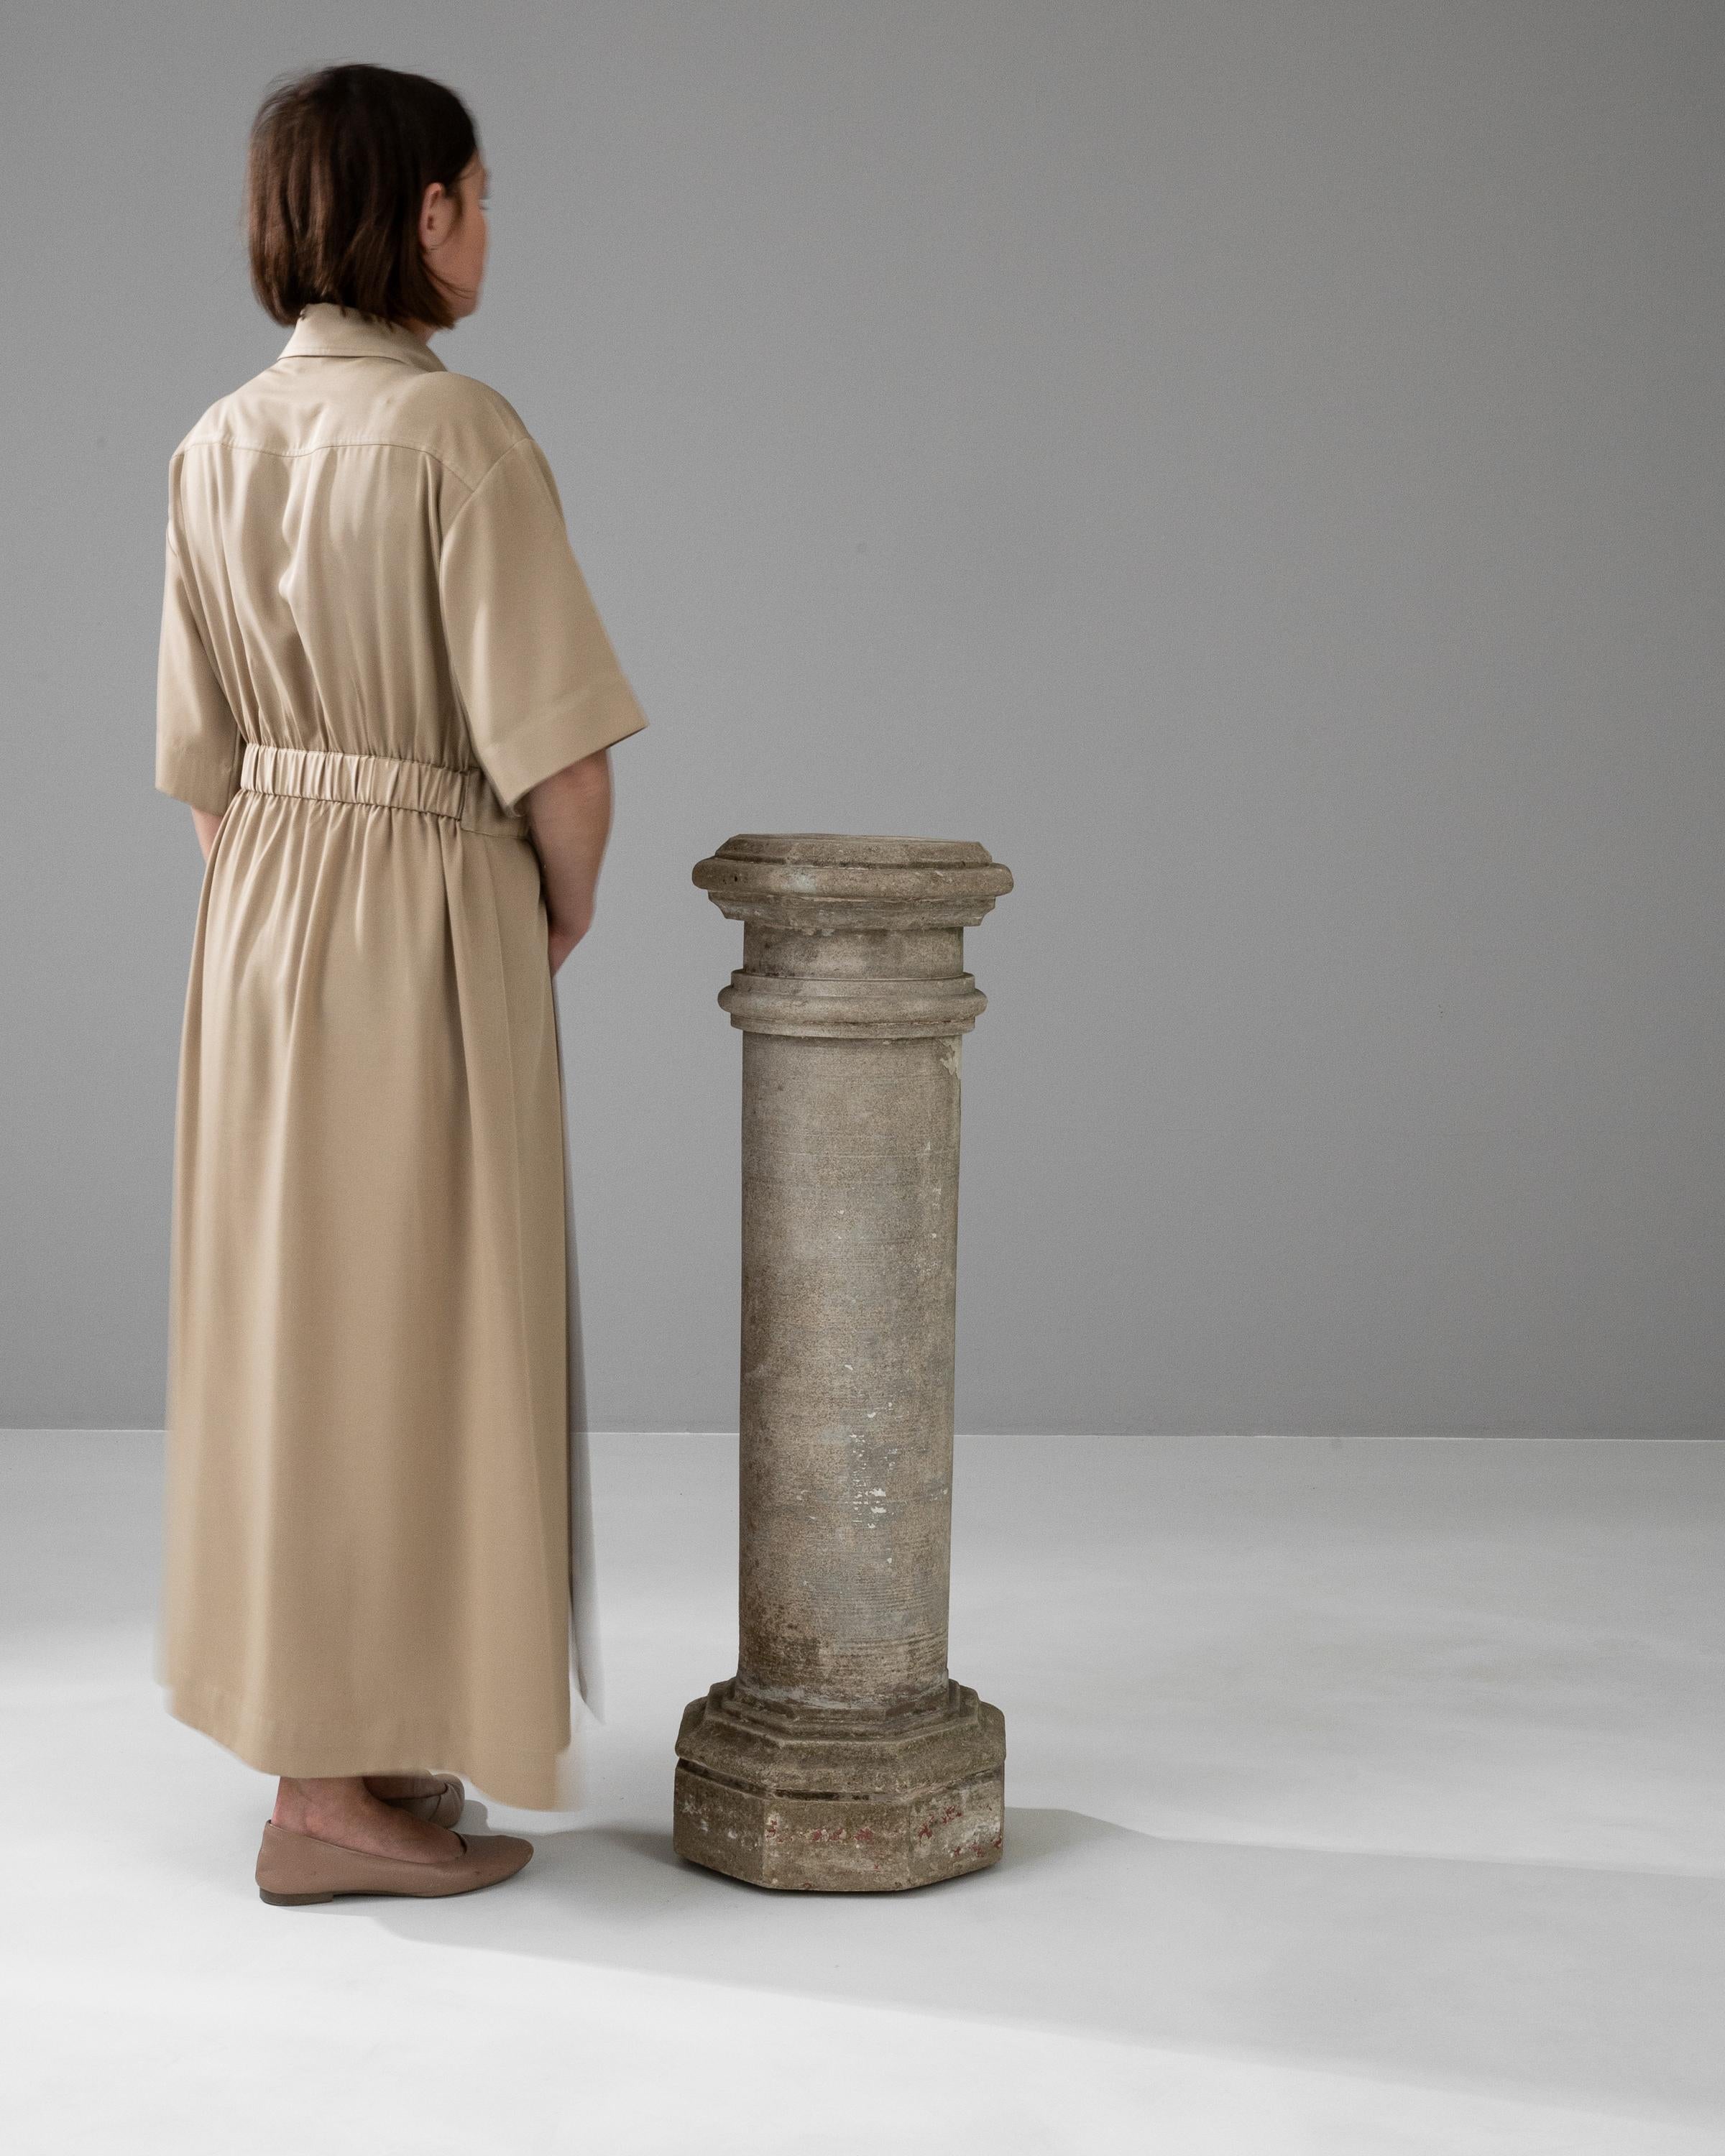 This robust 20th Century French Concrete Pedestal captures the enduring legacy of classical architecture. Its sturdy cylindrical shaft rises from a solid, square base, leading up to a dignified capital, which showcases subtle detailing reminiscent